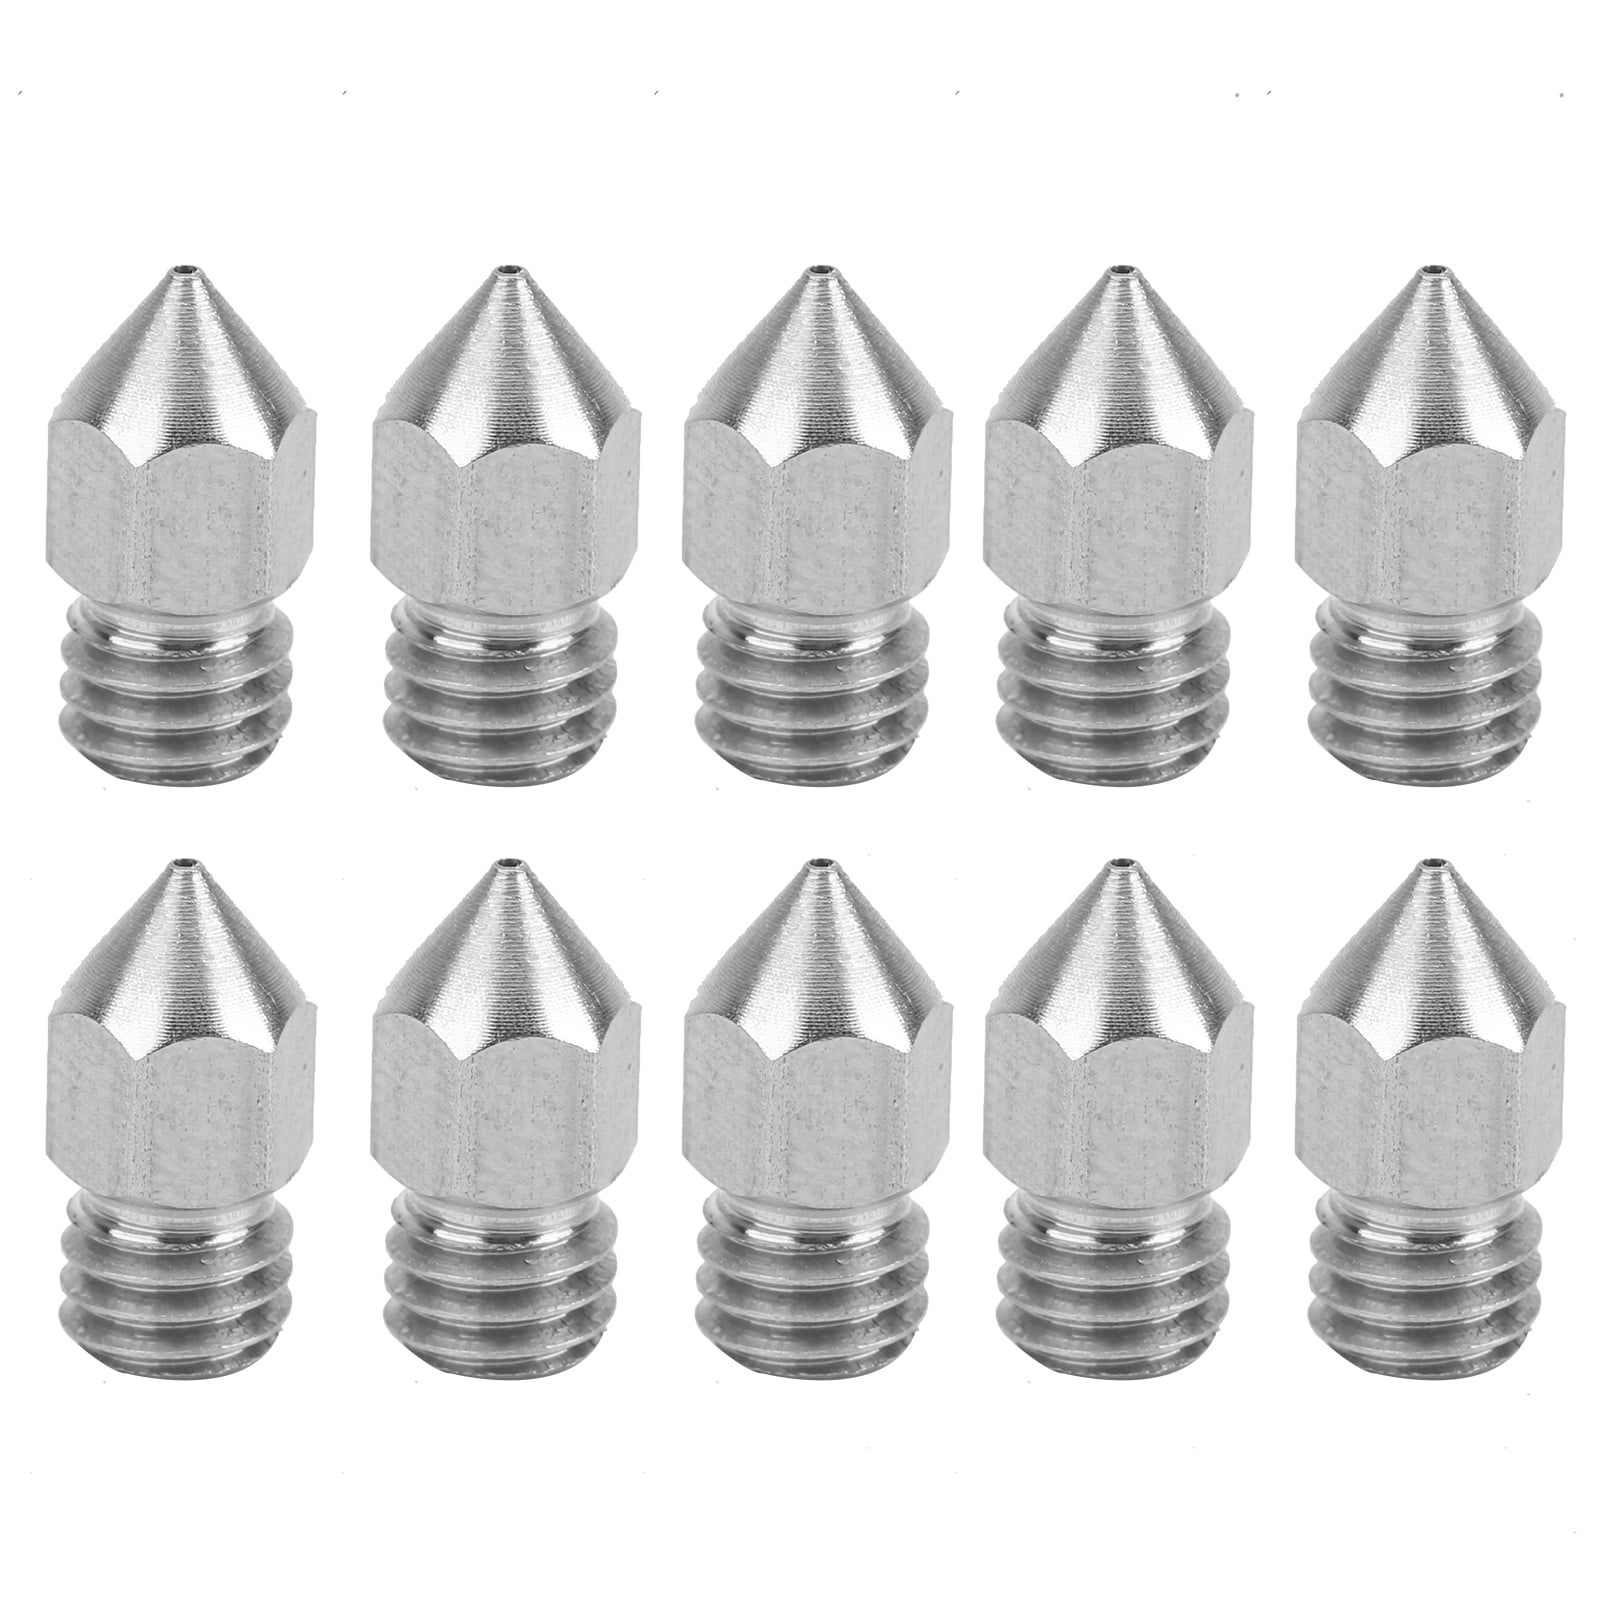 Stainless Steel Nozzles, Silver 3D Printer Nozzle Set, Stainless Steel Wear-Resistant Corrosion-Resistant Durable Extruder For 3D Printer 0.2mm,0.3mm,0.4mm,0.5mm,0.6mm - Walmart.com